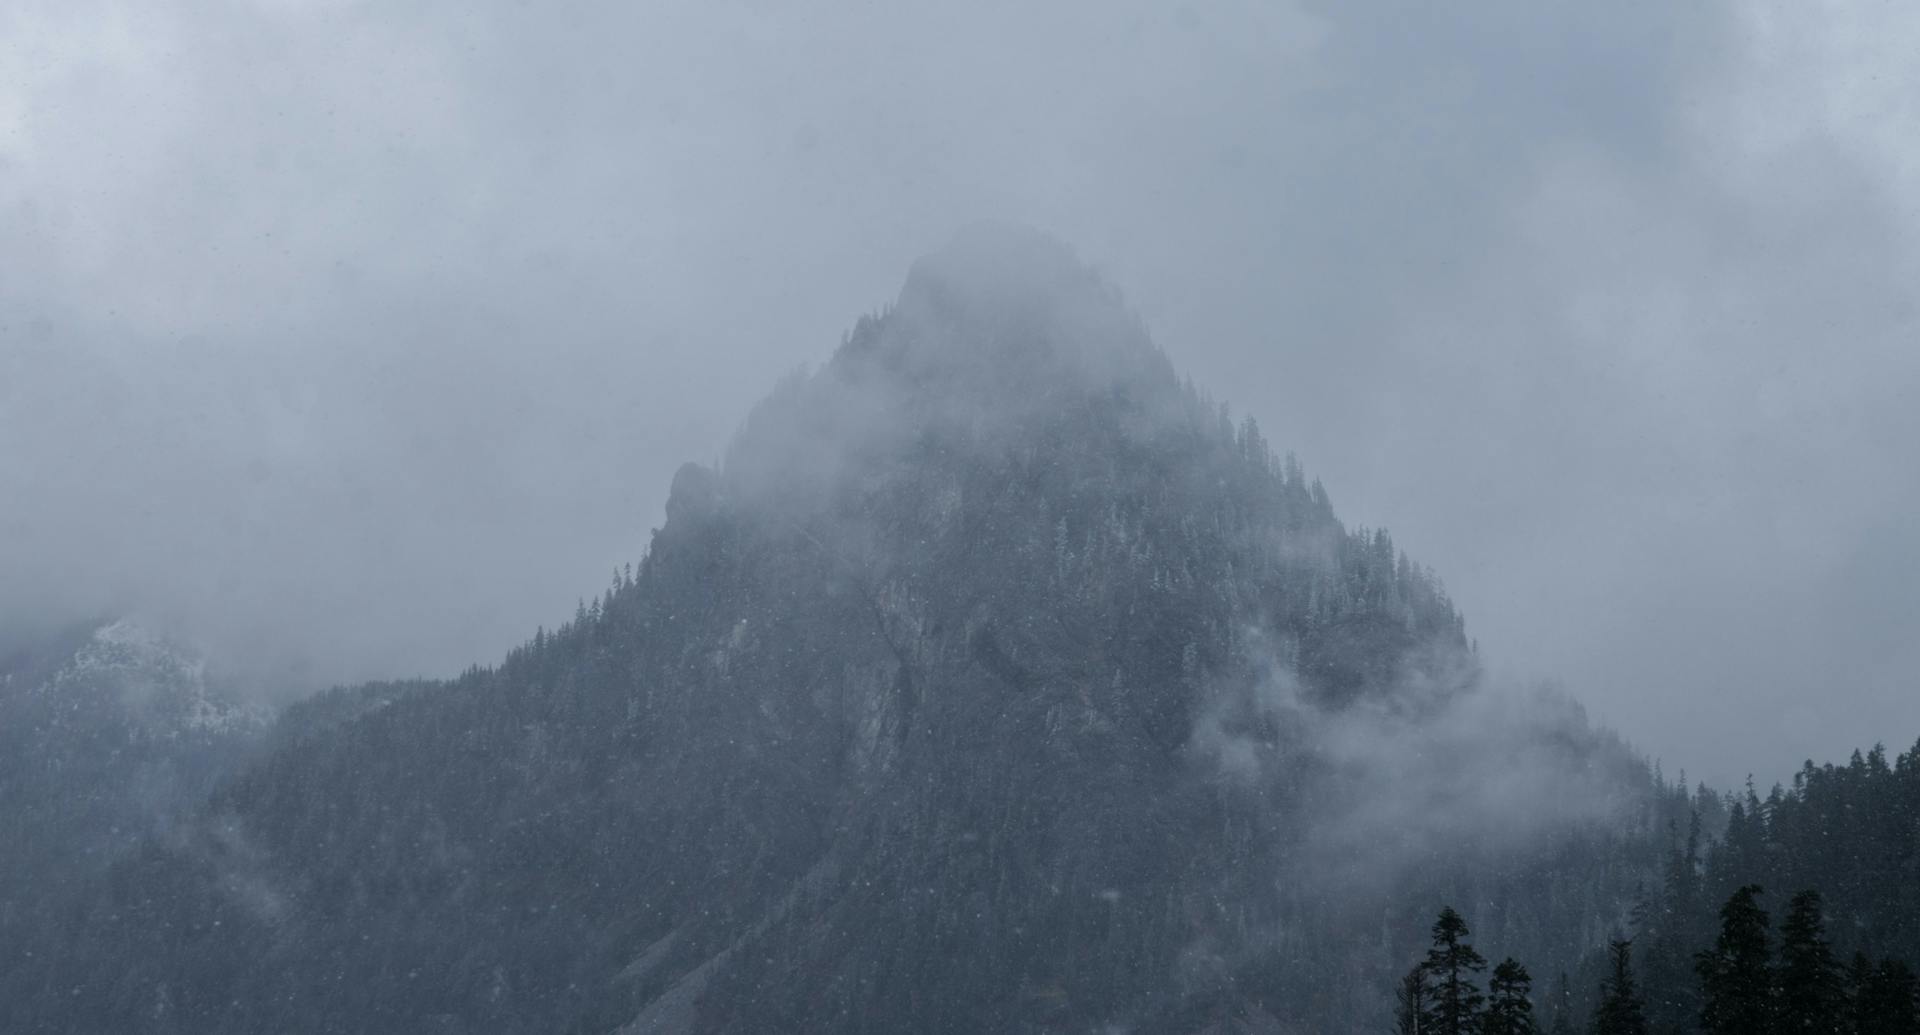 A photo Josh took of a mountain in Snoqualmie Pass in Washington, USA